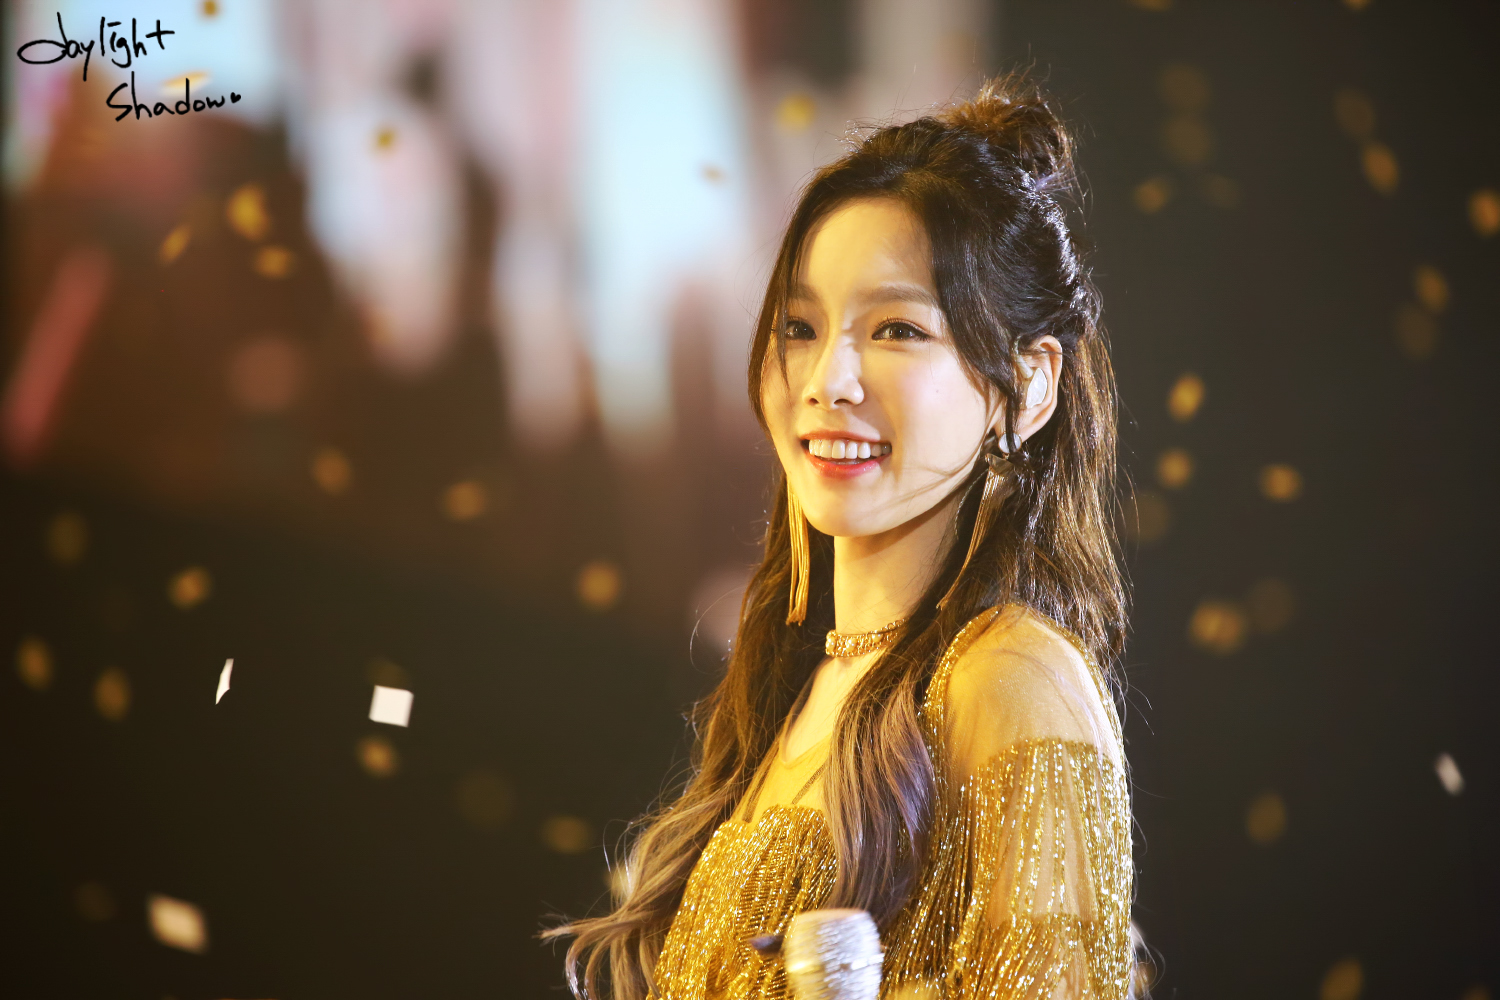 170610-11 PERSONA in Hong Kong 태연 by DAYL!GHT SHADOW (20).jpg